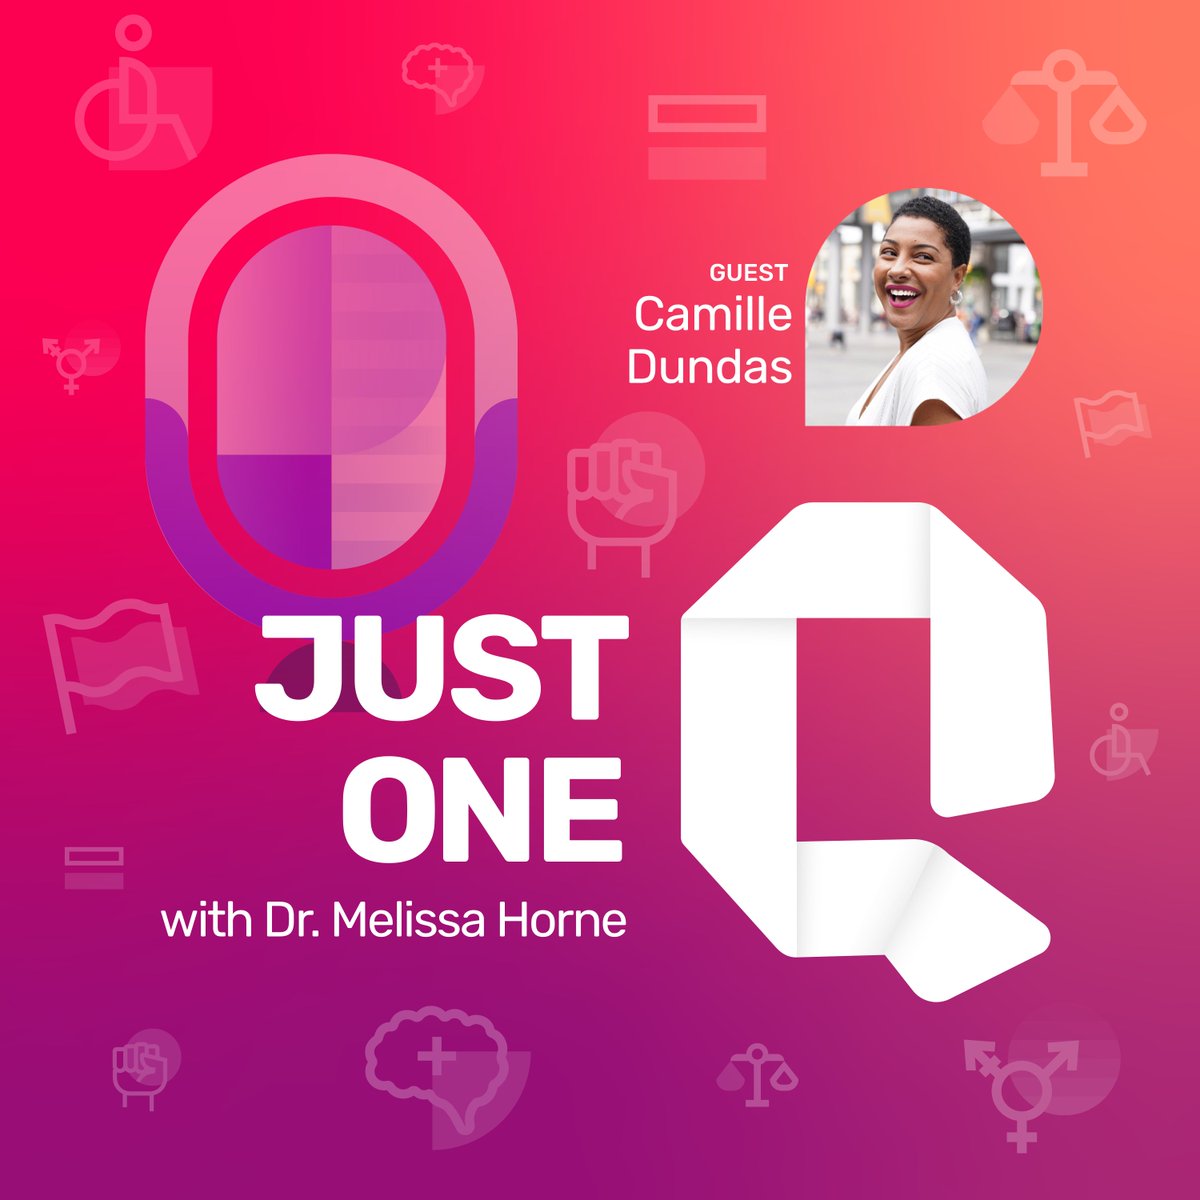 NEW podcast episode! @CamilleDundas shares why personal accountability is a cornerstone in the practice of allyship and ways that aspiring allies and advocates can help.

Listen now:
bit.ly/3Xe1RC3

#JustOneQ #DEIPodcast #DEIB #Dialectic #Allyship #inclusiveworkplaces